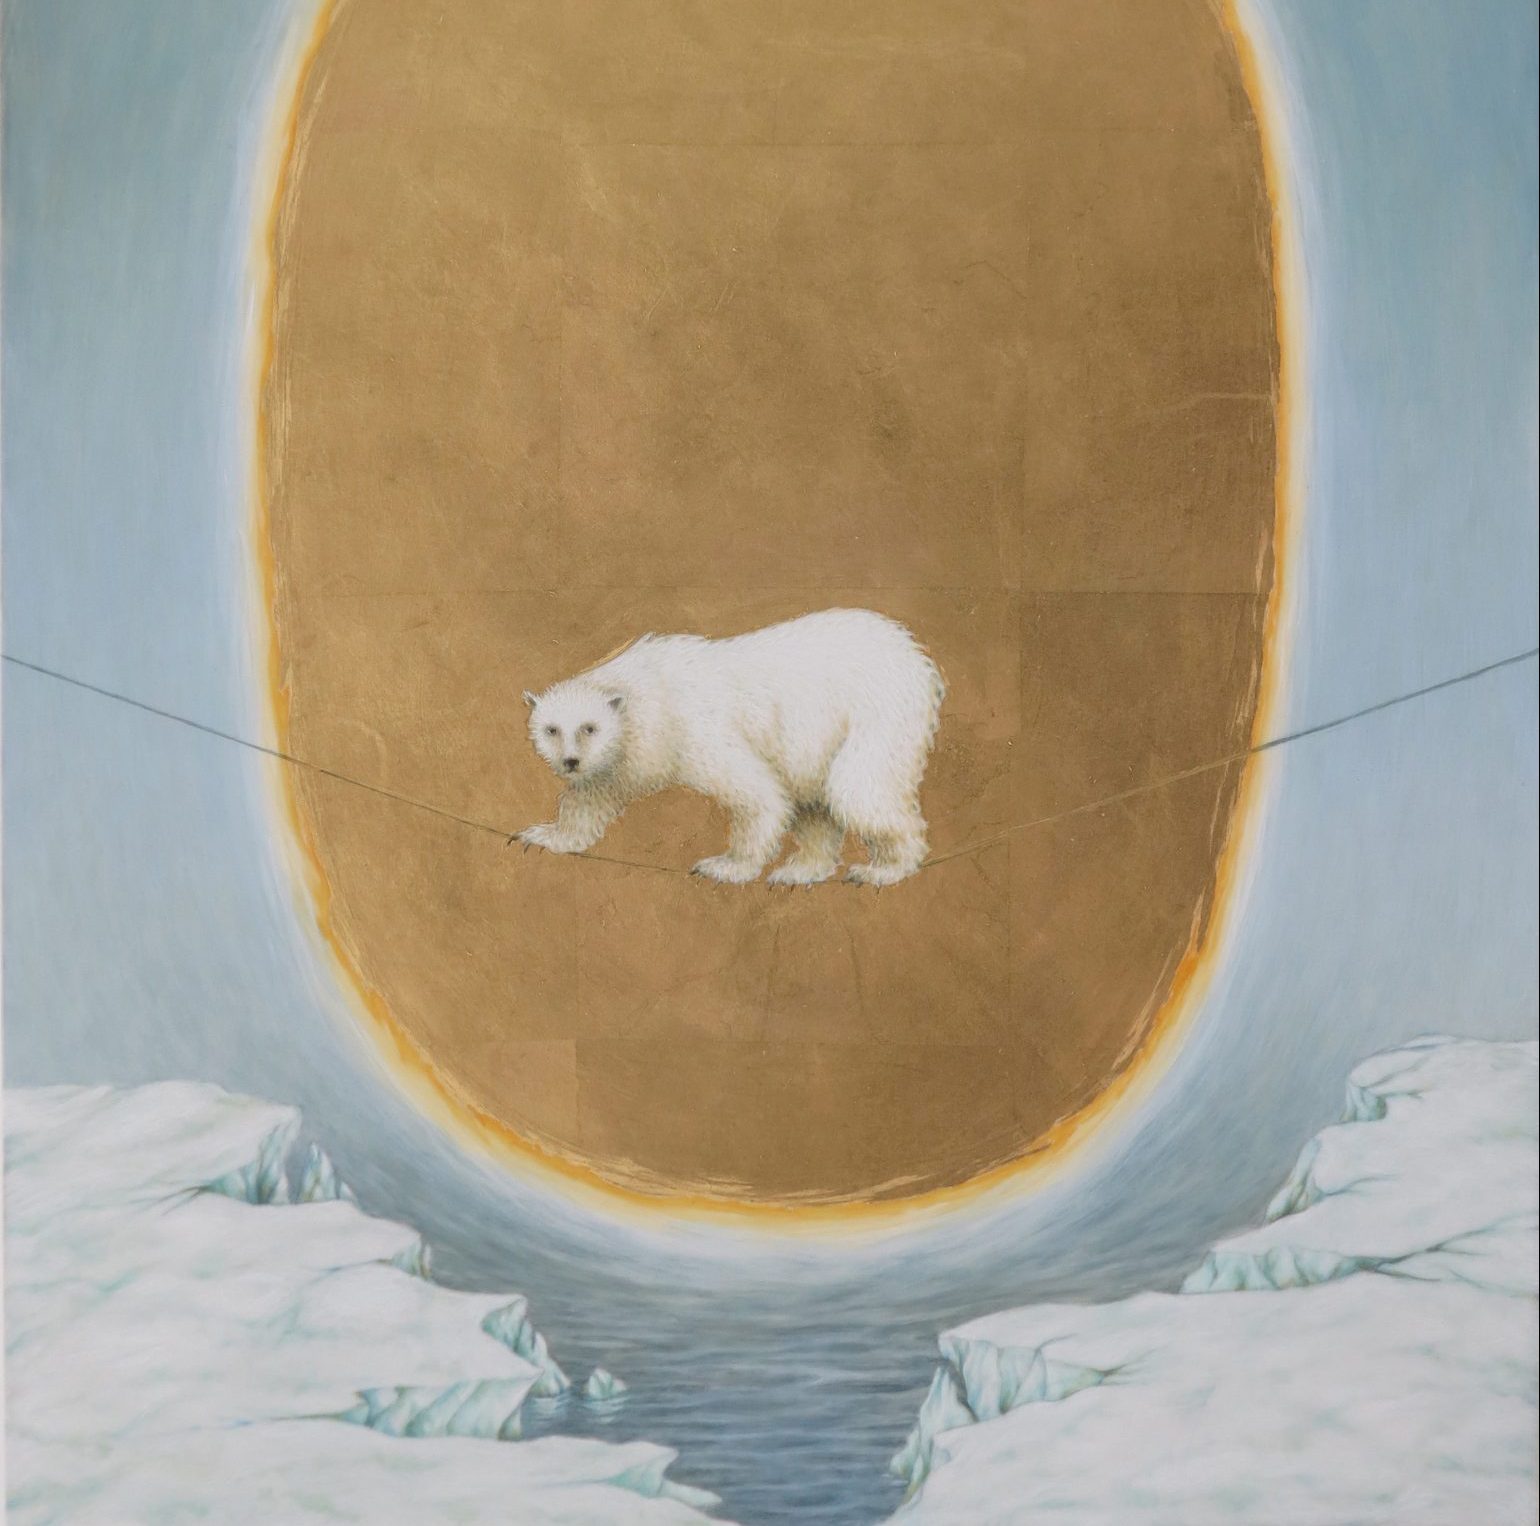 A drawing of a polar bear walking on a tightrope. There are ice caps in the water in the background.